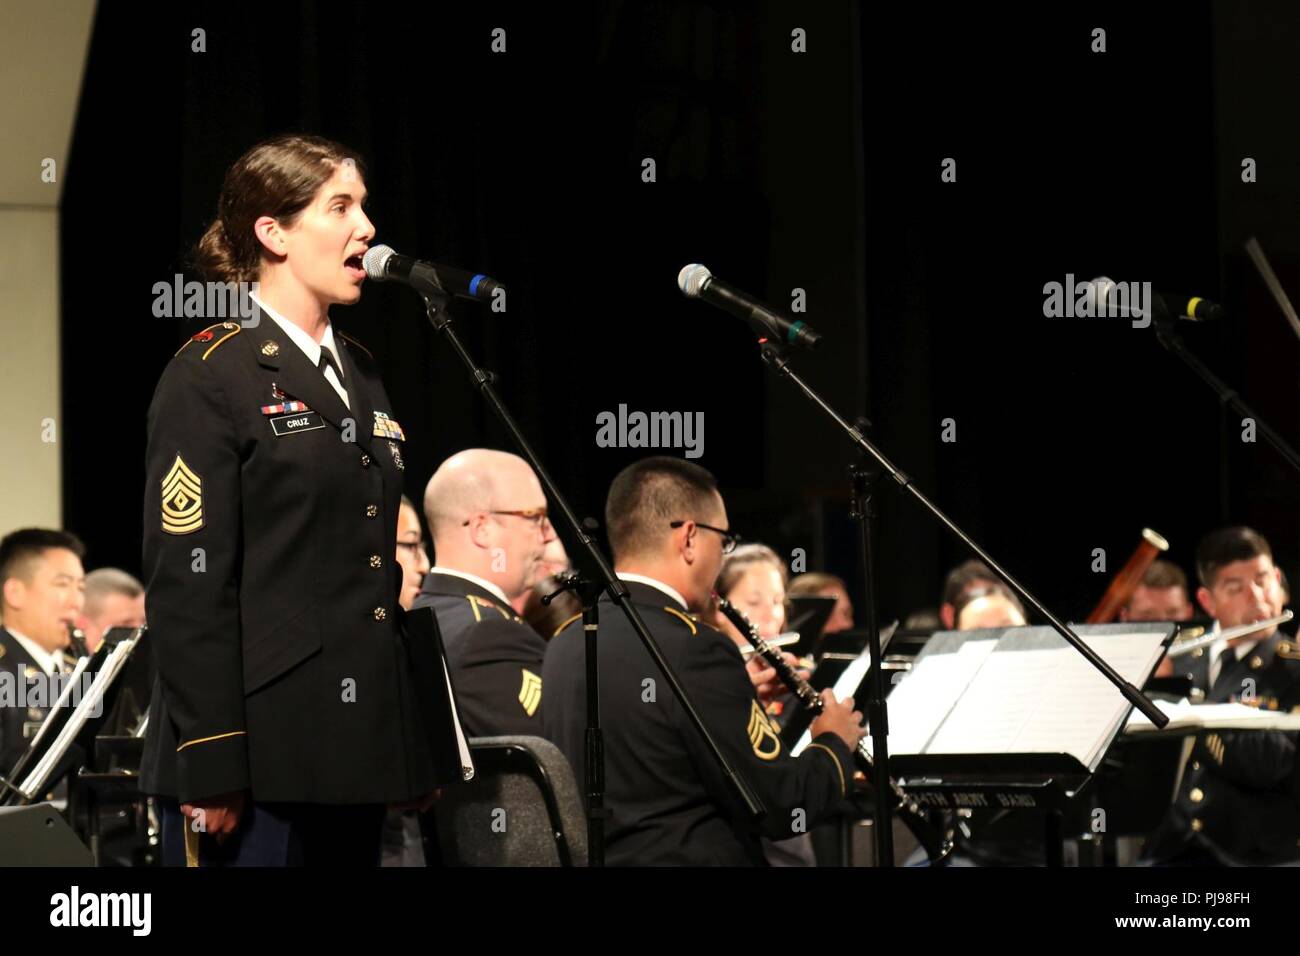 1st Sgt. Tasha Cruz of the 234th Army Band performs the Service Song Medley in honor of the military veterans in the crowd during the joint concert of the 111th Army Band and the 234th Army Band in Astoria High School in Astoria, Oregon, July 7, 2018. The concert is the second collaboration between the 111th Army Band and the 234th Army Band with efforts to display the results of their training in a live setting. Stock Photo